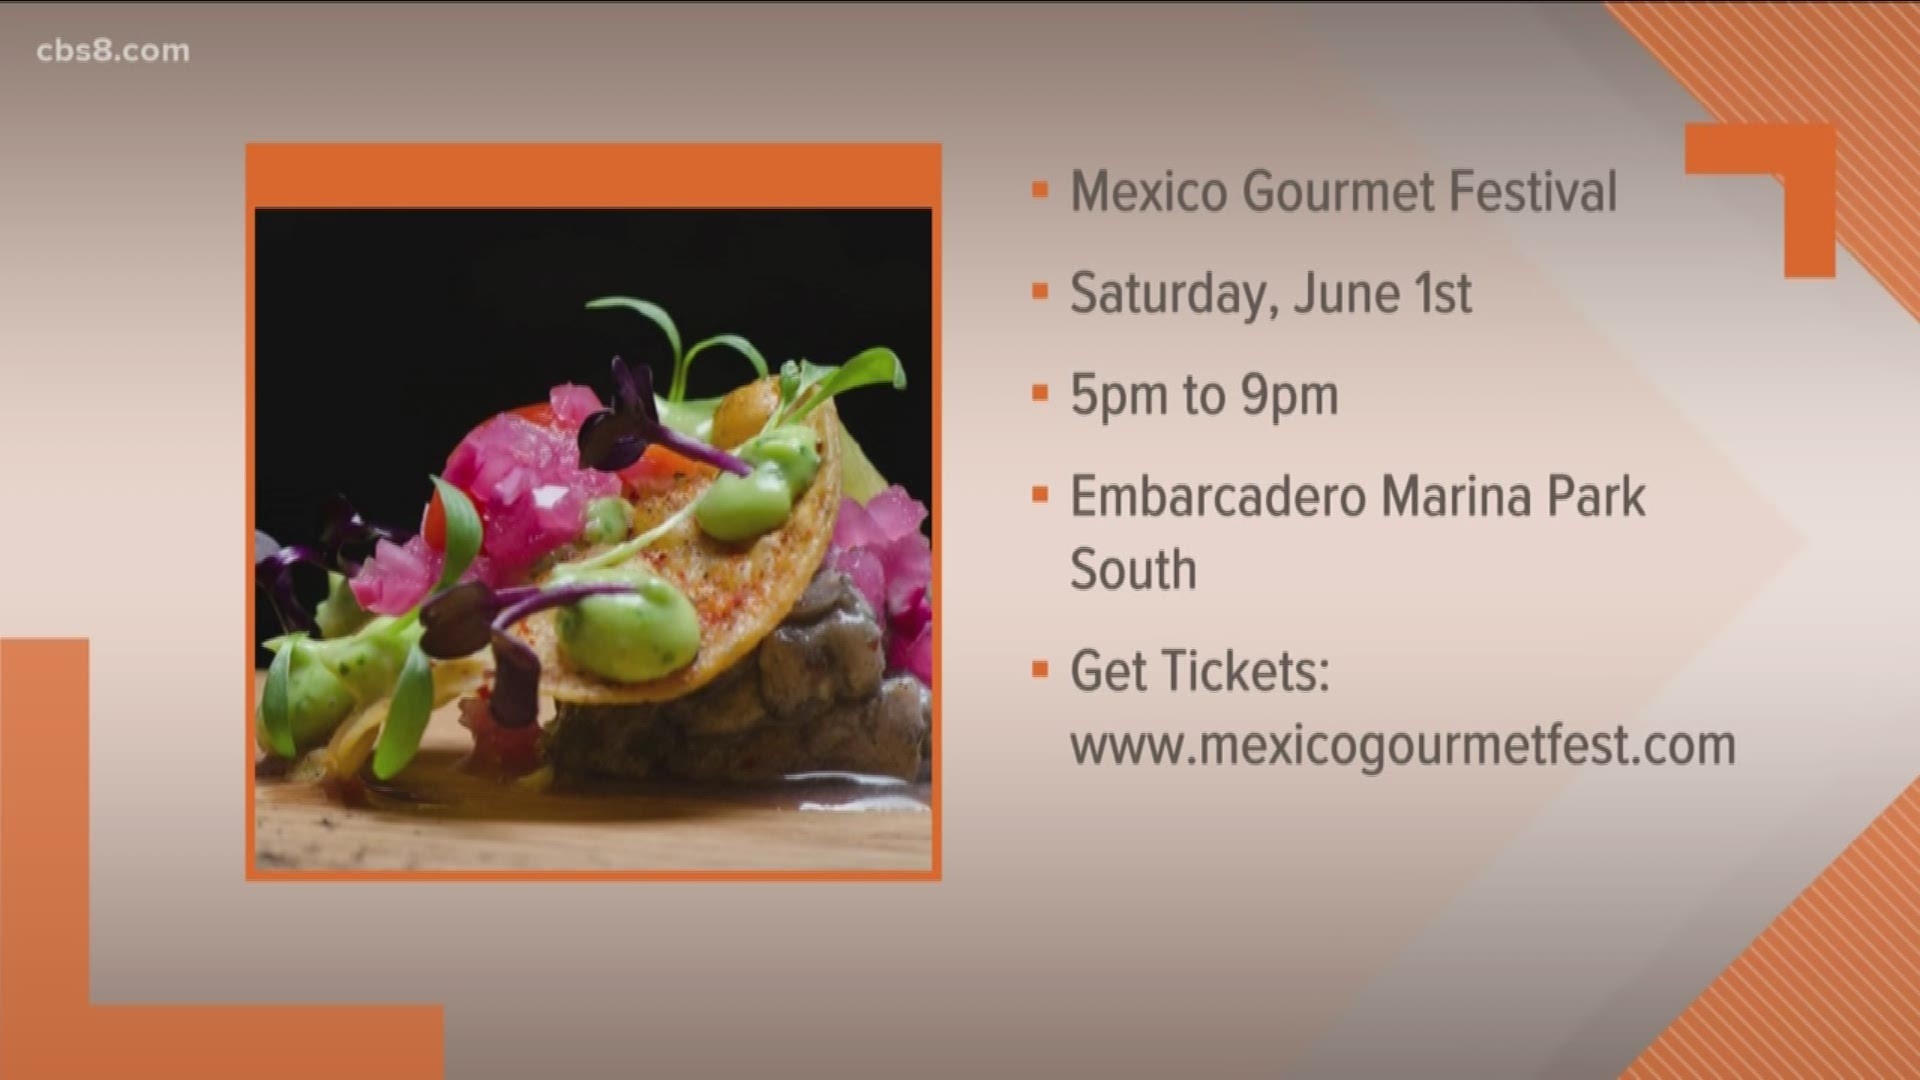 Chef-Owner of ﬁve restaurants, Enrique Herrera, Chef Rosie O’Connor, and Chef Javier Rubio visited News 8 to give us a taste of their delicious cuisines for Mexico Gourmet Festival